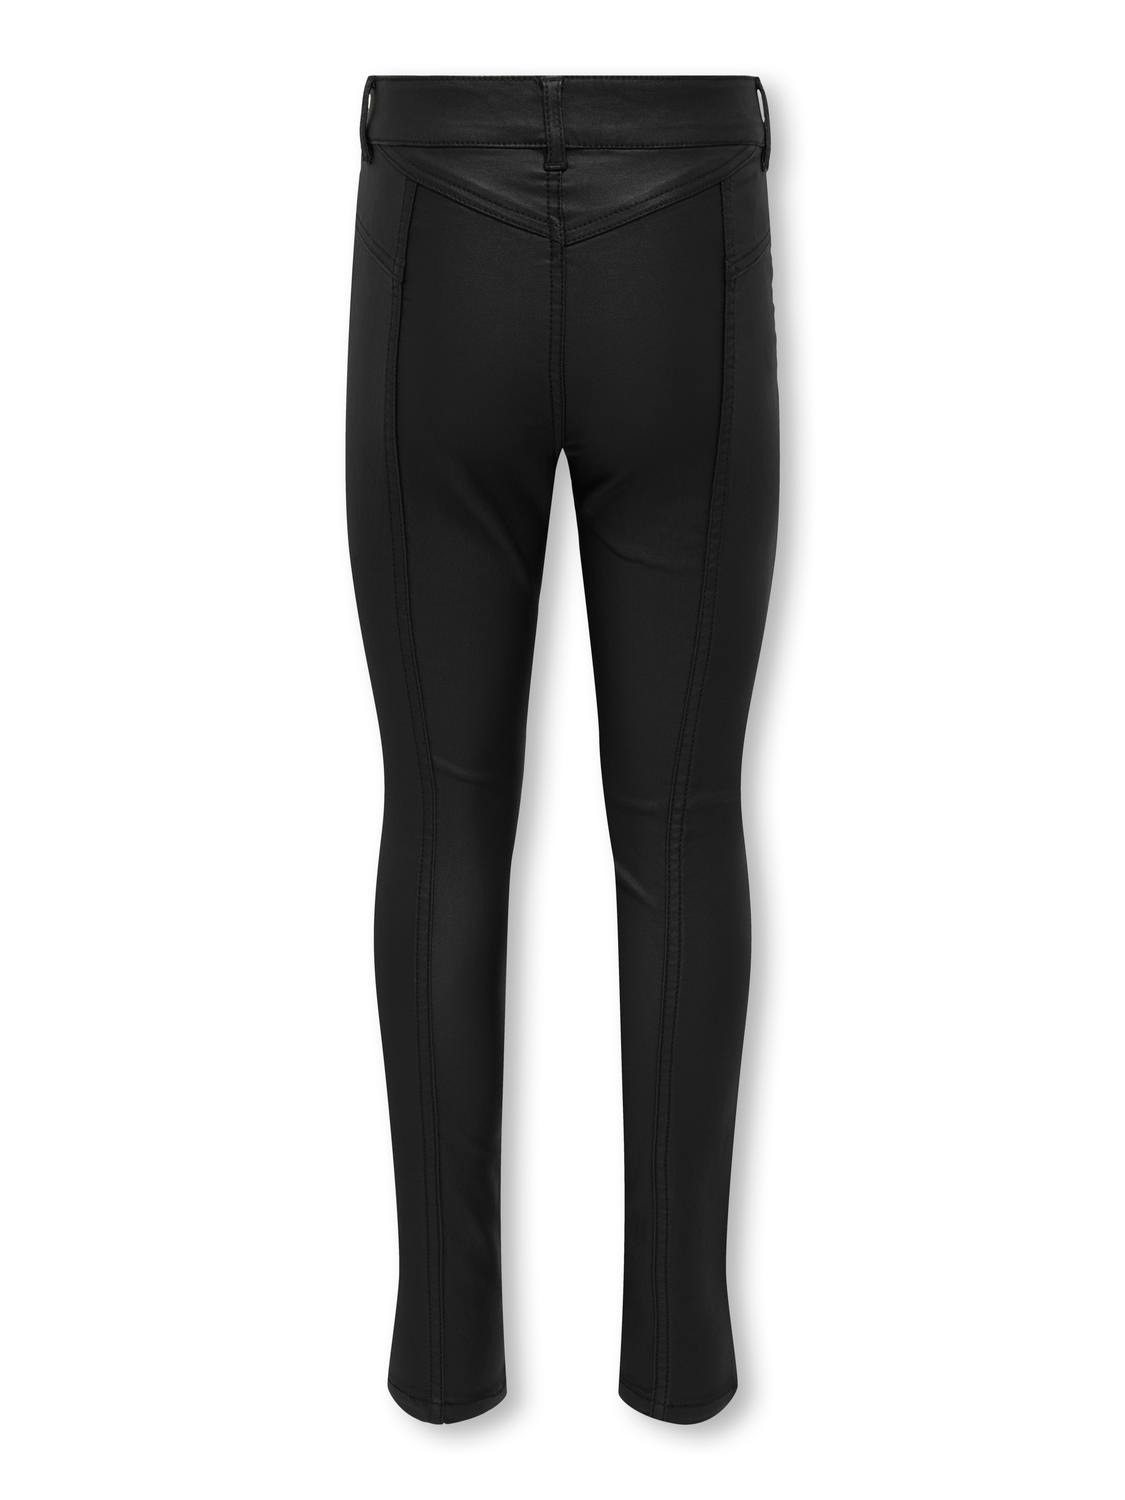 ONLY Skinny Fit Trousers -Black - 15273847